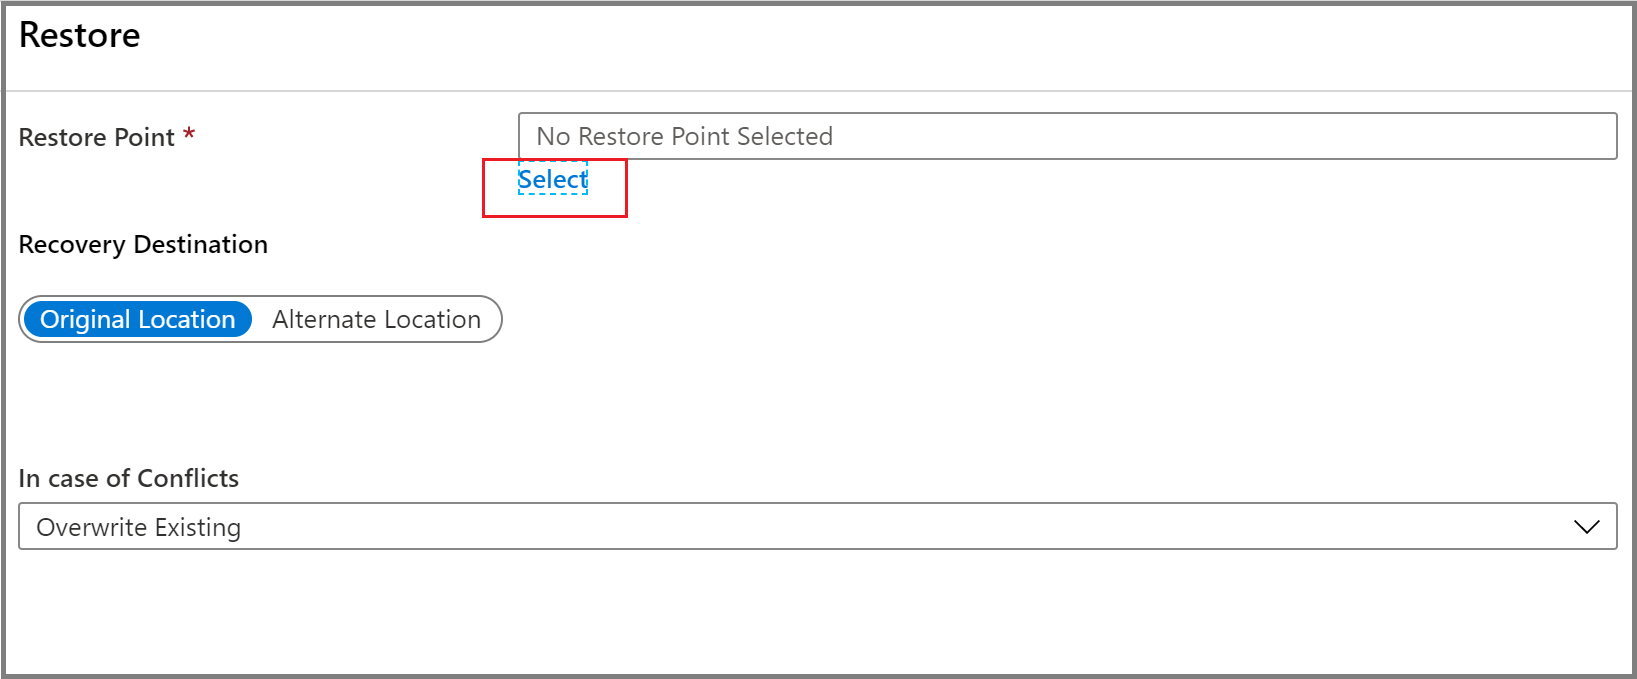 Select restore point by choosing Select